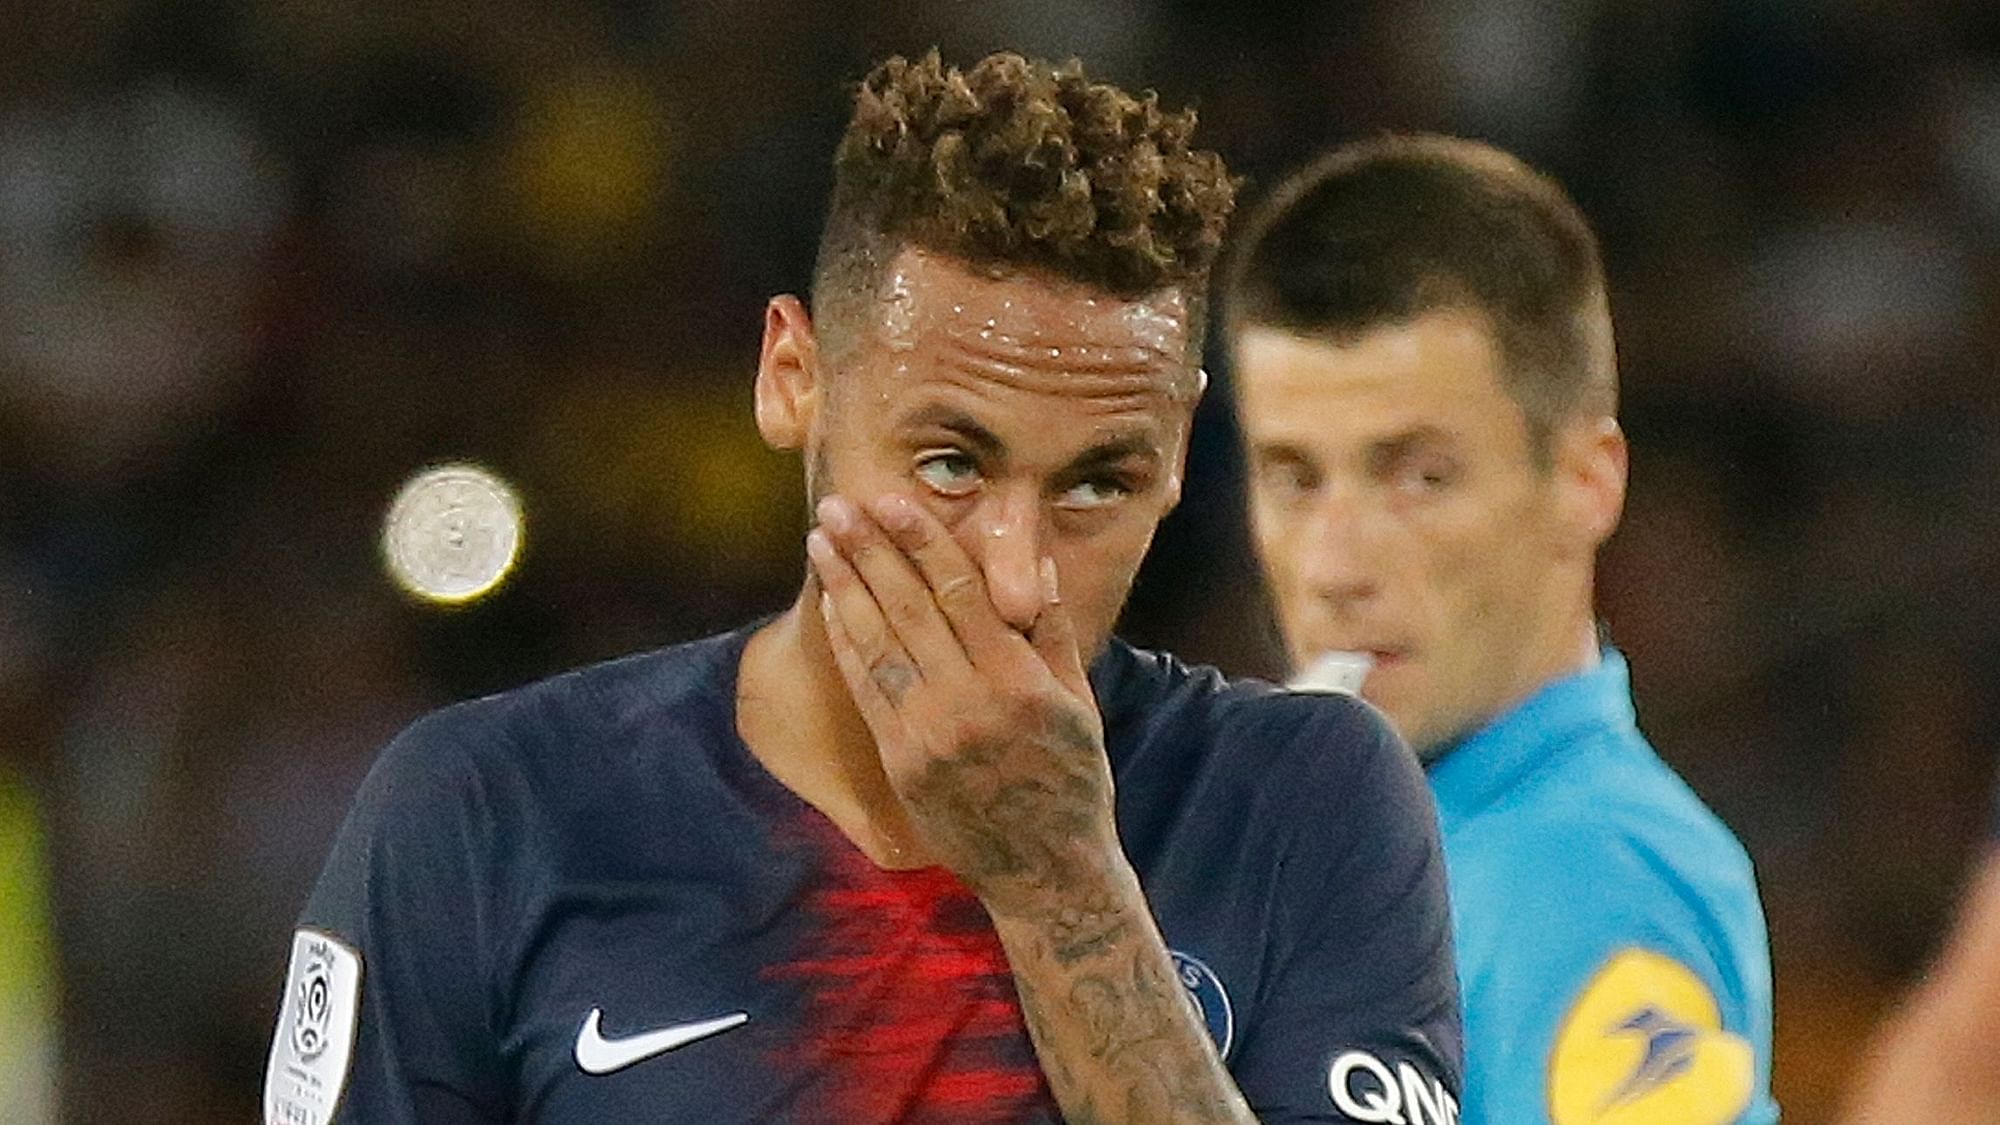 UEFA has rejected the against Neymar’s three-match Champions League ban.